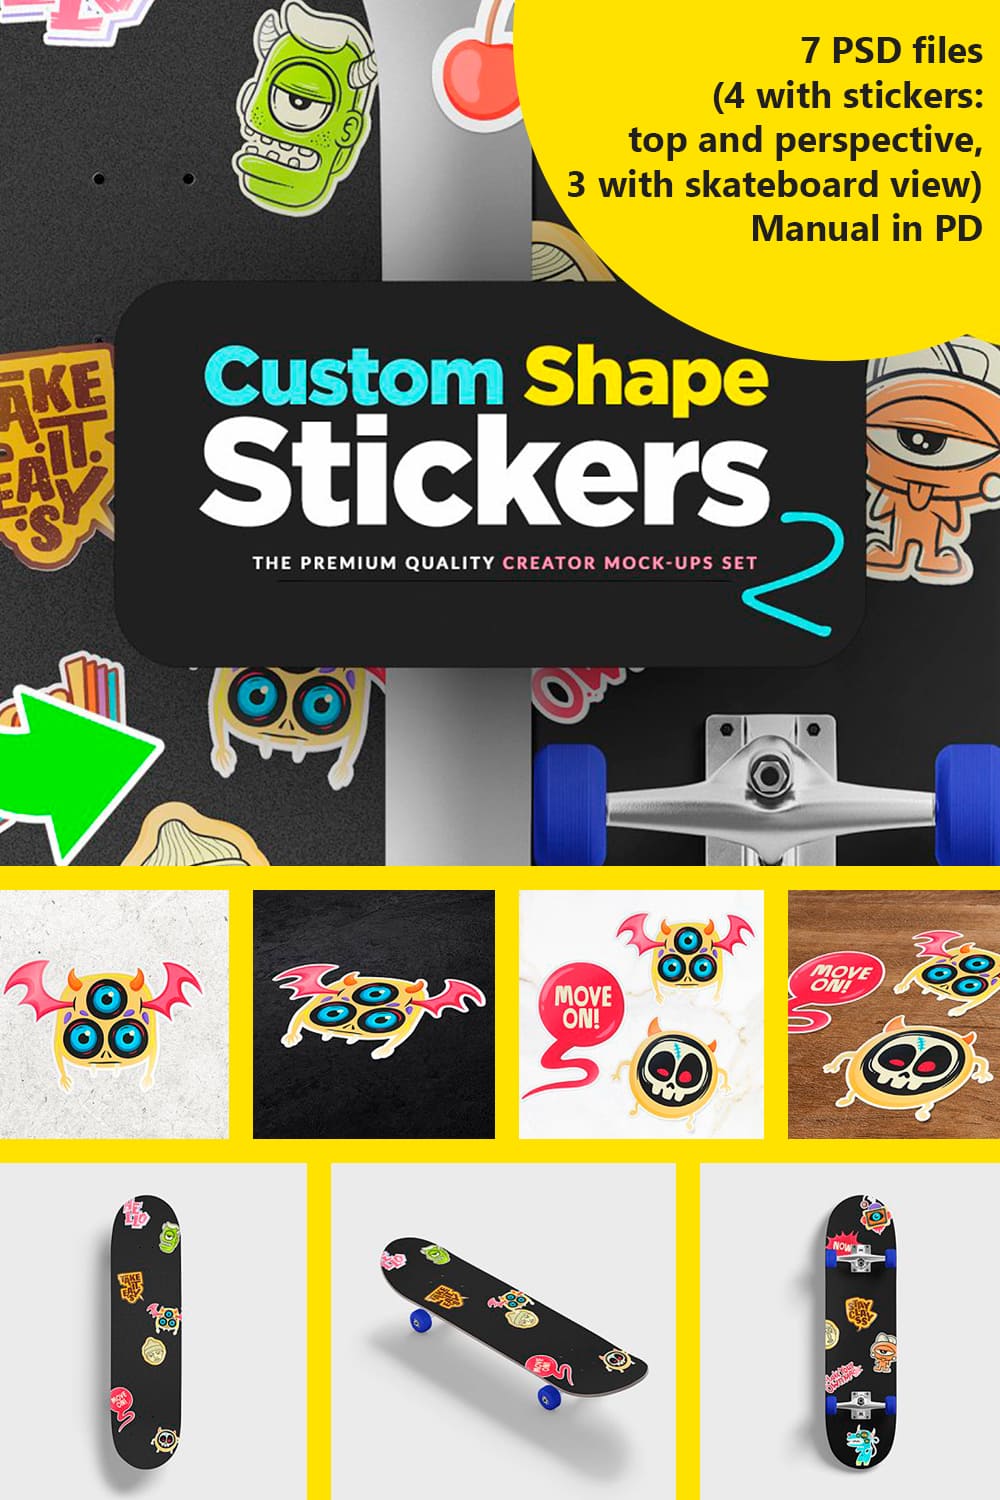 A selection of images with colorful stickers.